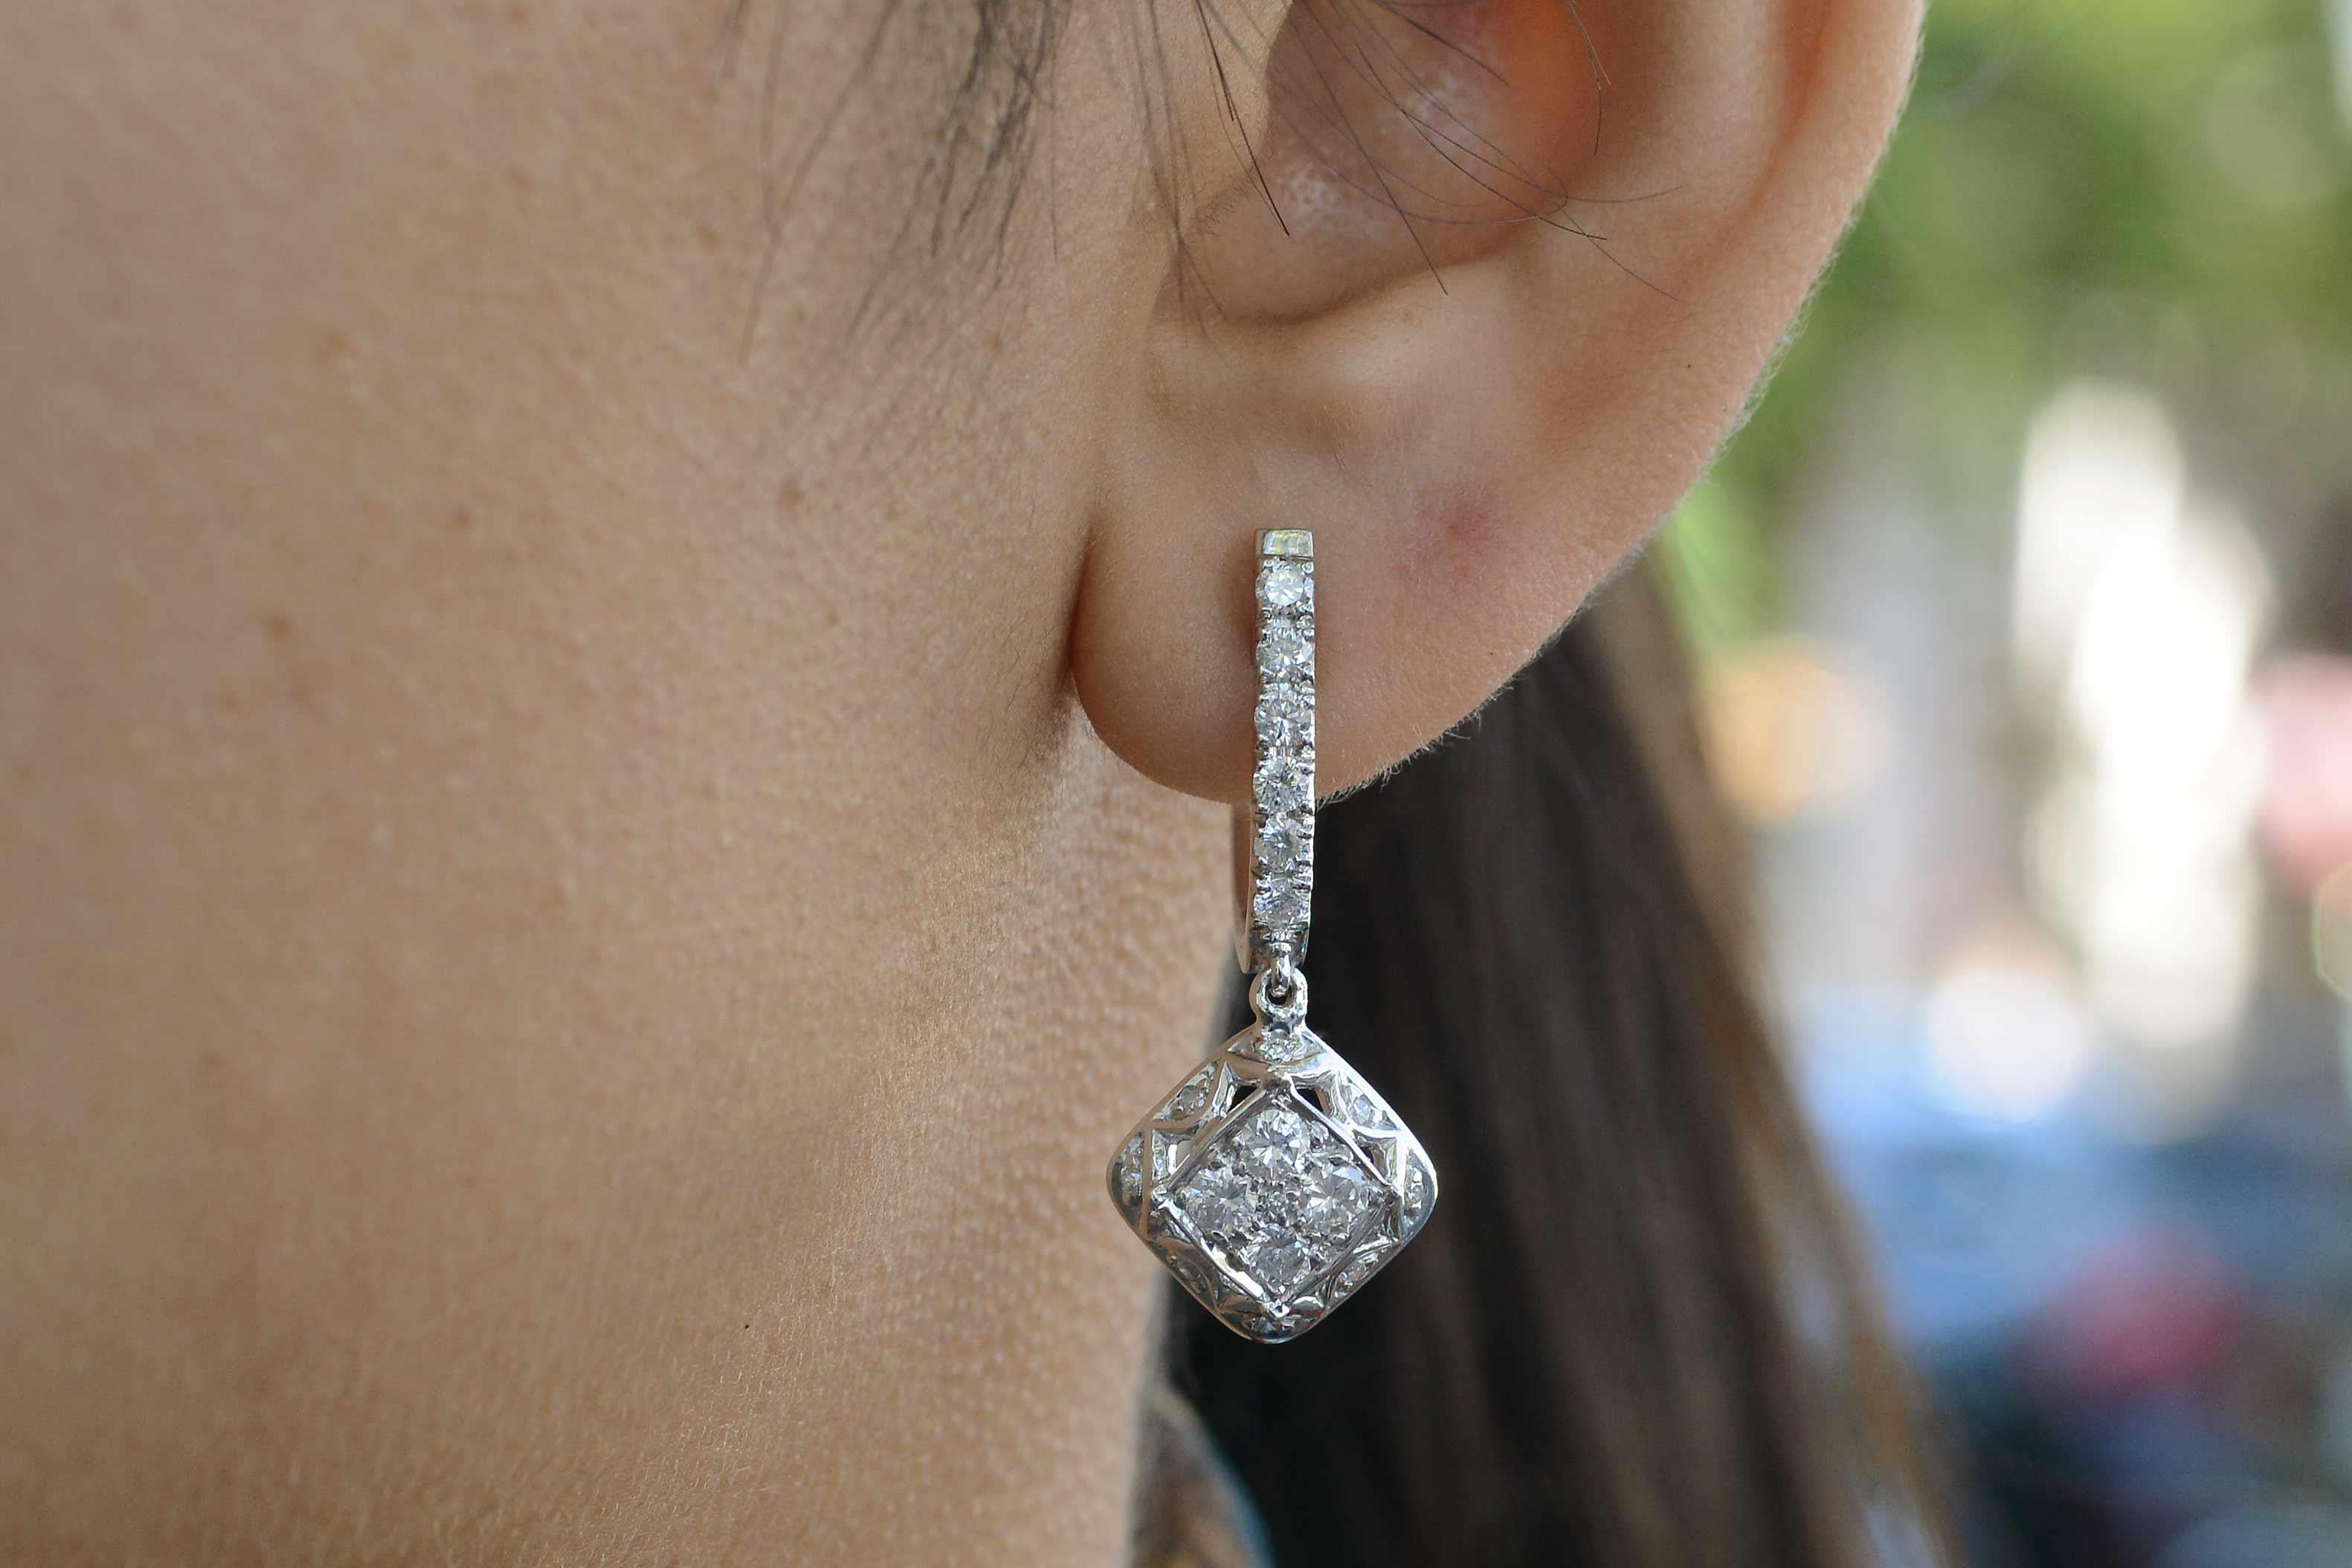 An eminently wearable pair of diamond dangle earrings in a dramatic drop style. Adorned with 1.20 carats of dazzling diamonds made even more sparkling in their 18k white gold settings. The way they seductively sway from the ears captures light from